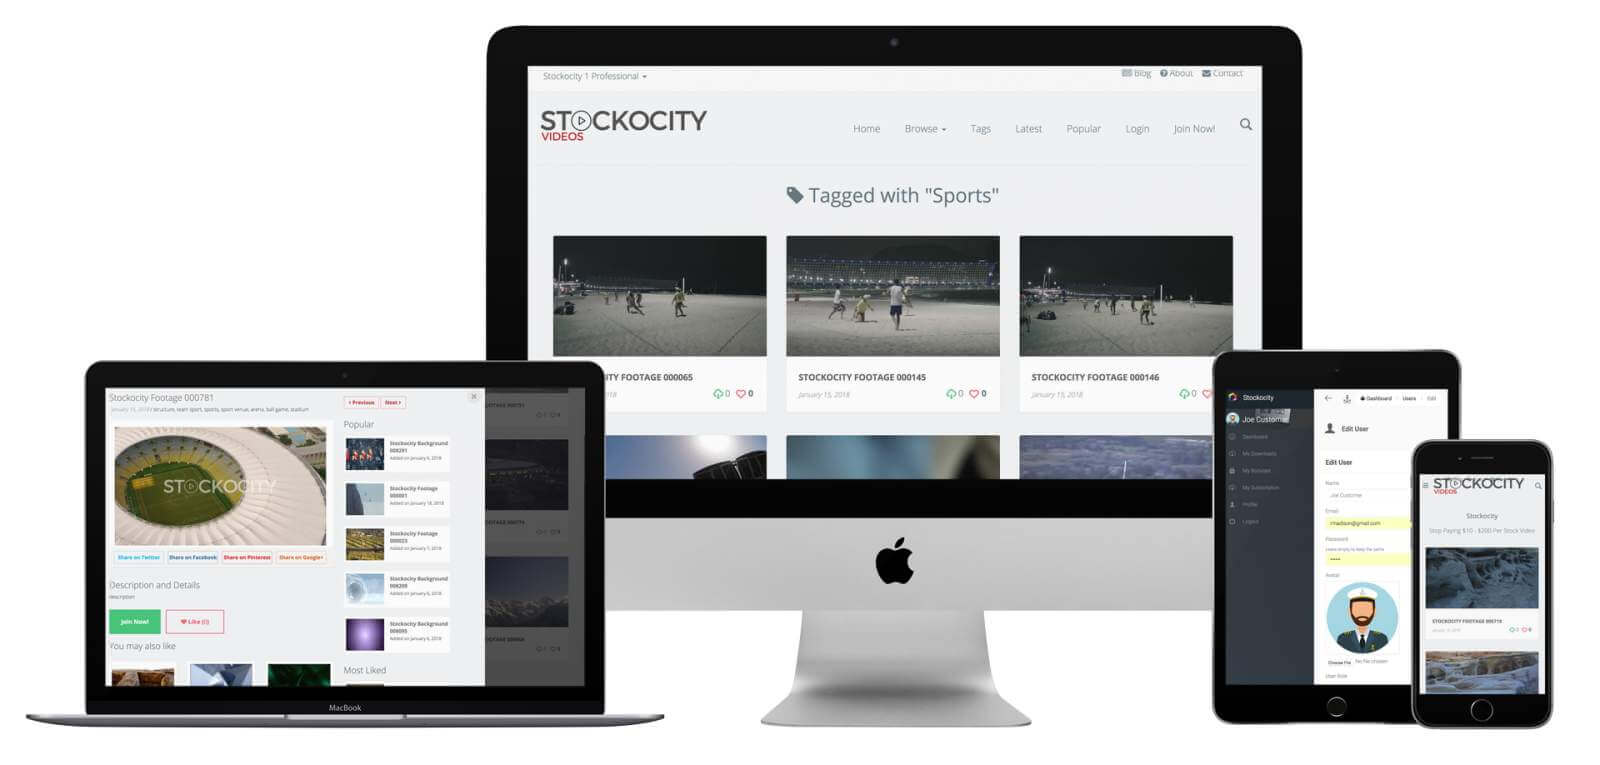 Stockocity-4K-Review